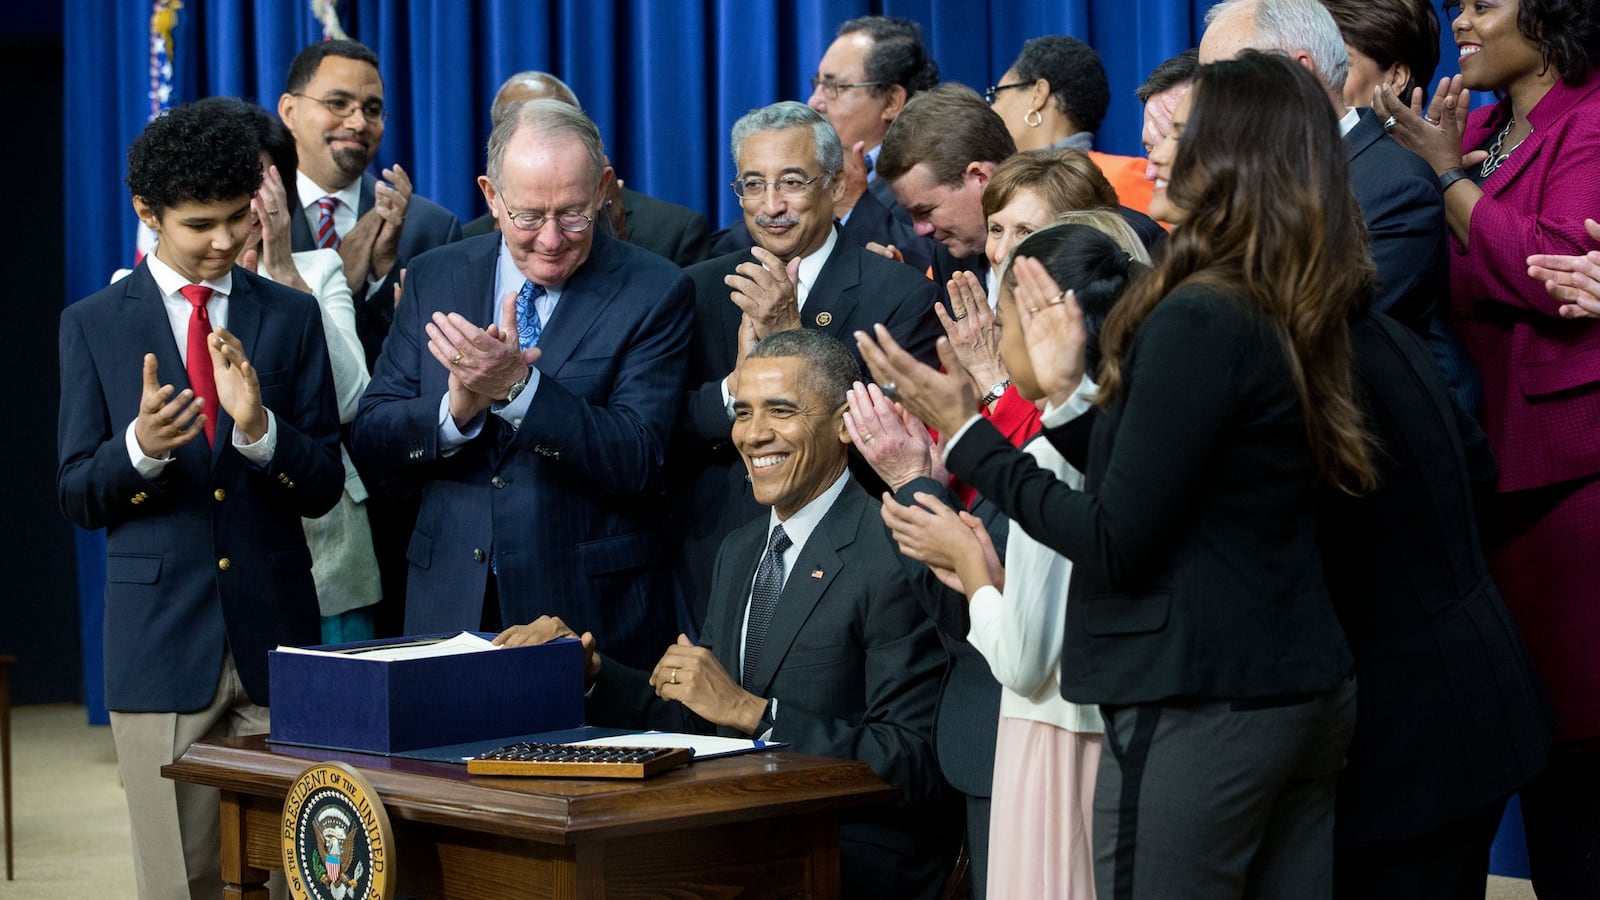 President Barack Obama signs the Every Student Succeeds Act in December 2015, surrounded by U.S. Sen. Lamar Alexander of Tennessee and other champions and supporters of the new law.